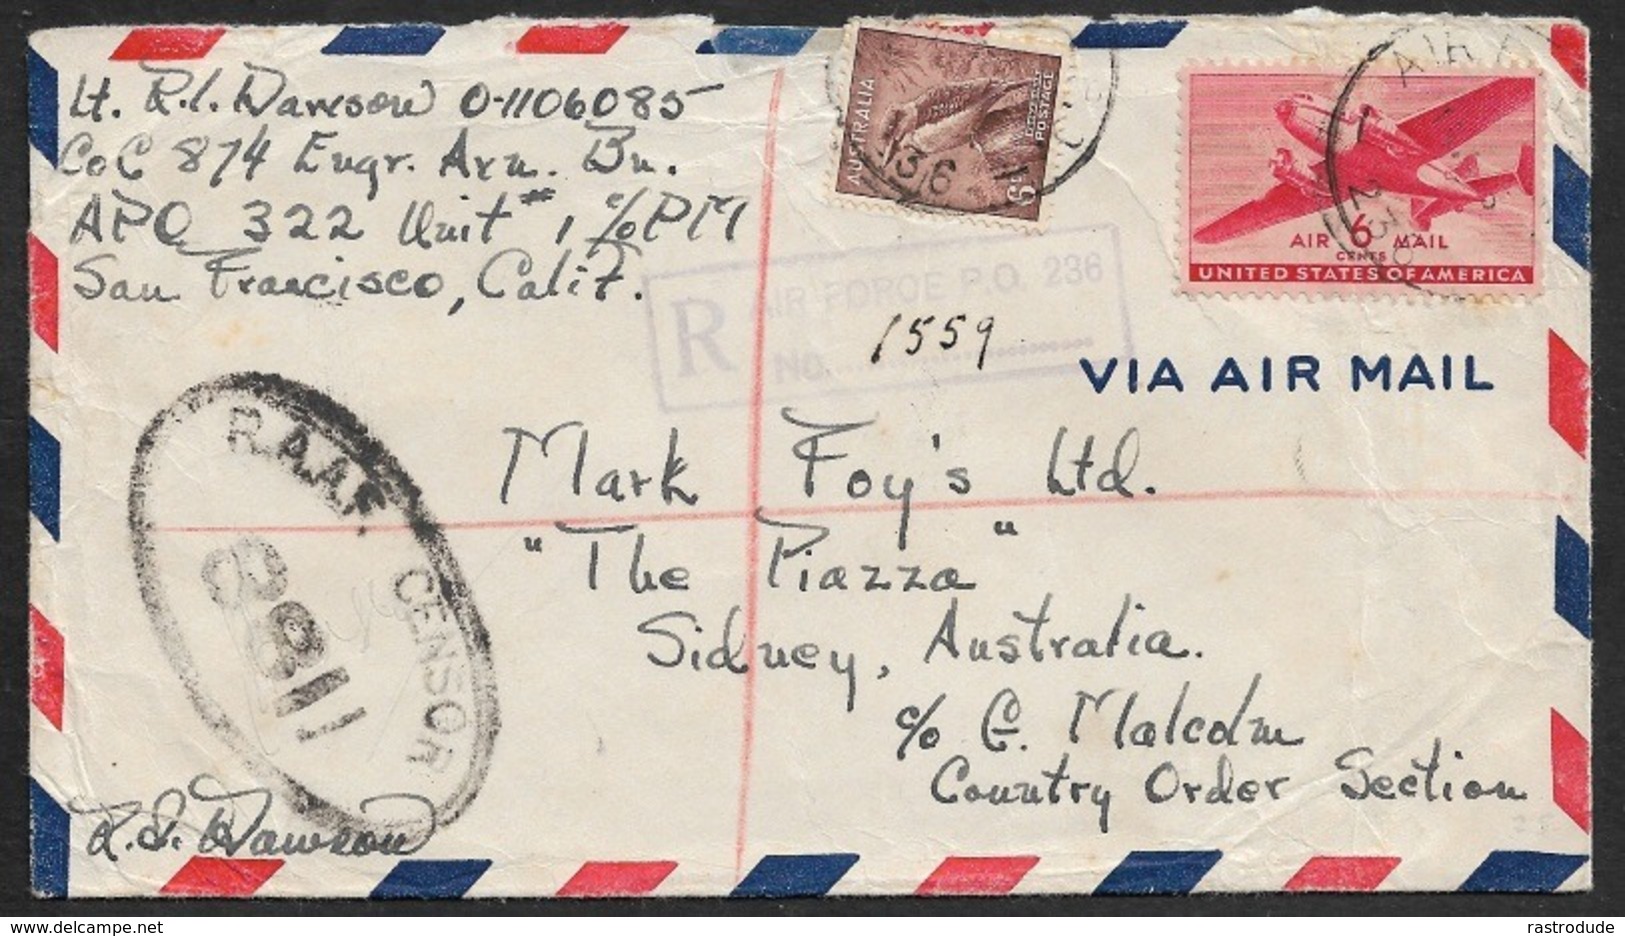 1945 - MIXED FRANKING U.S / AUSTRALIA APO 322 FINSCHHAFEN, NEW GUINEA Censored WWII Army Cover - 2c. 1941-1960 Covers